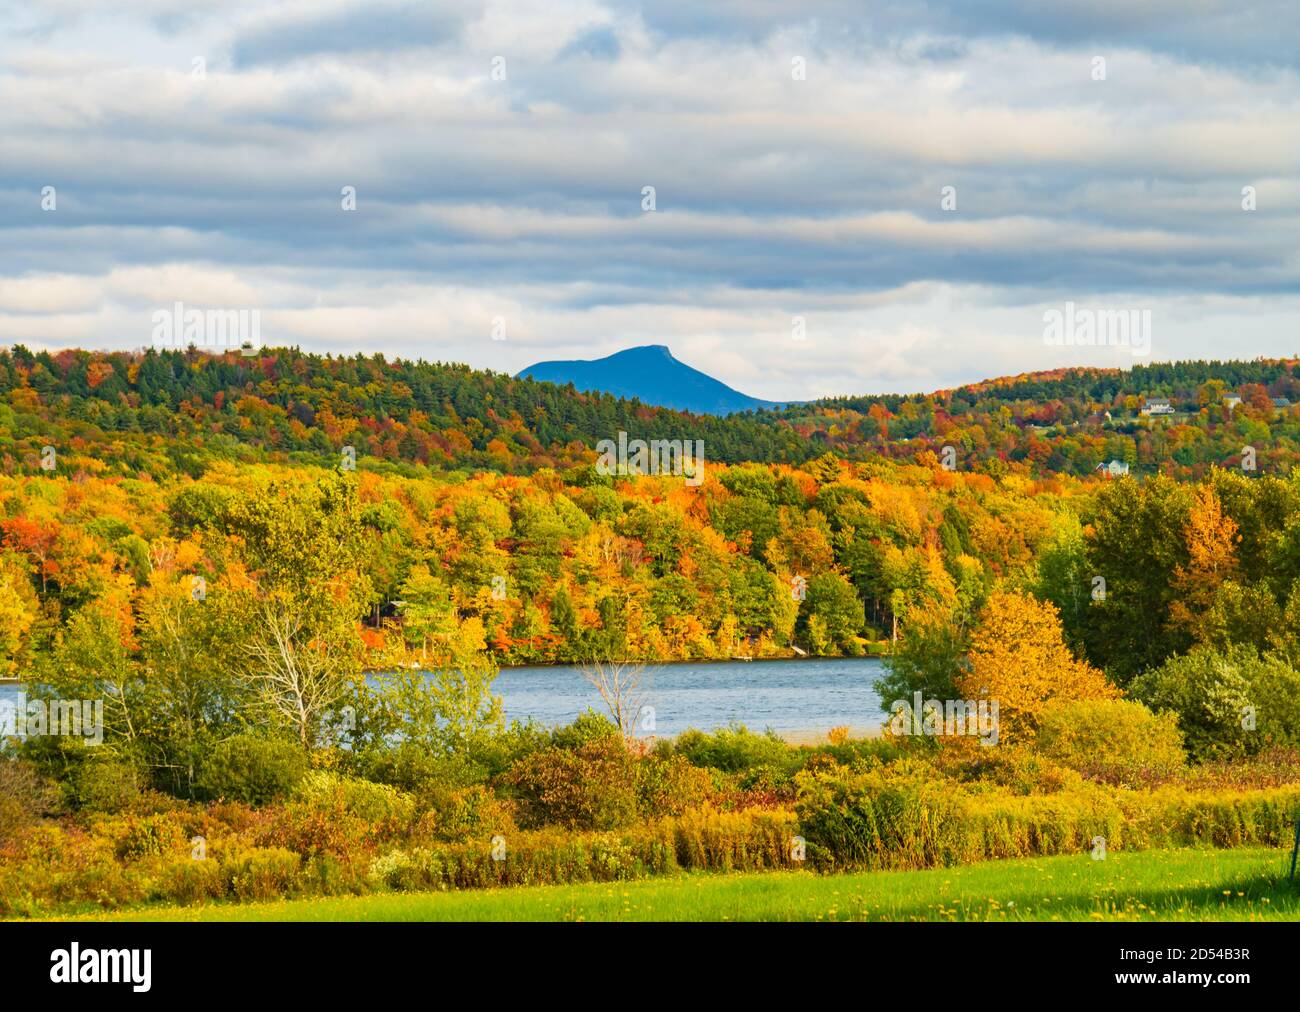 Lake Iroquois surrounded by forests in brilliant fall foliage colors with Camel's Hump Mountain in the distance Stock Photo